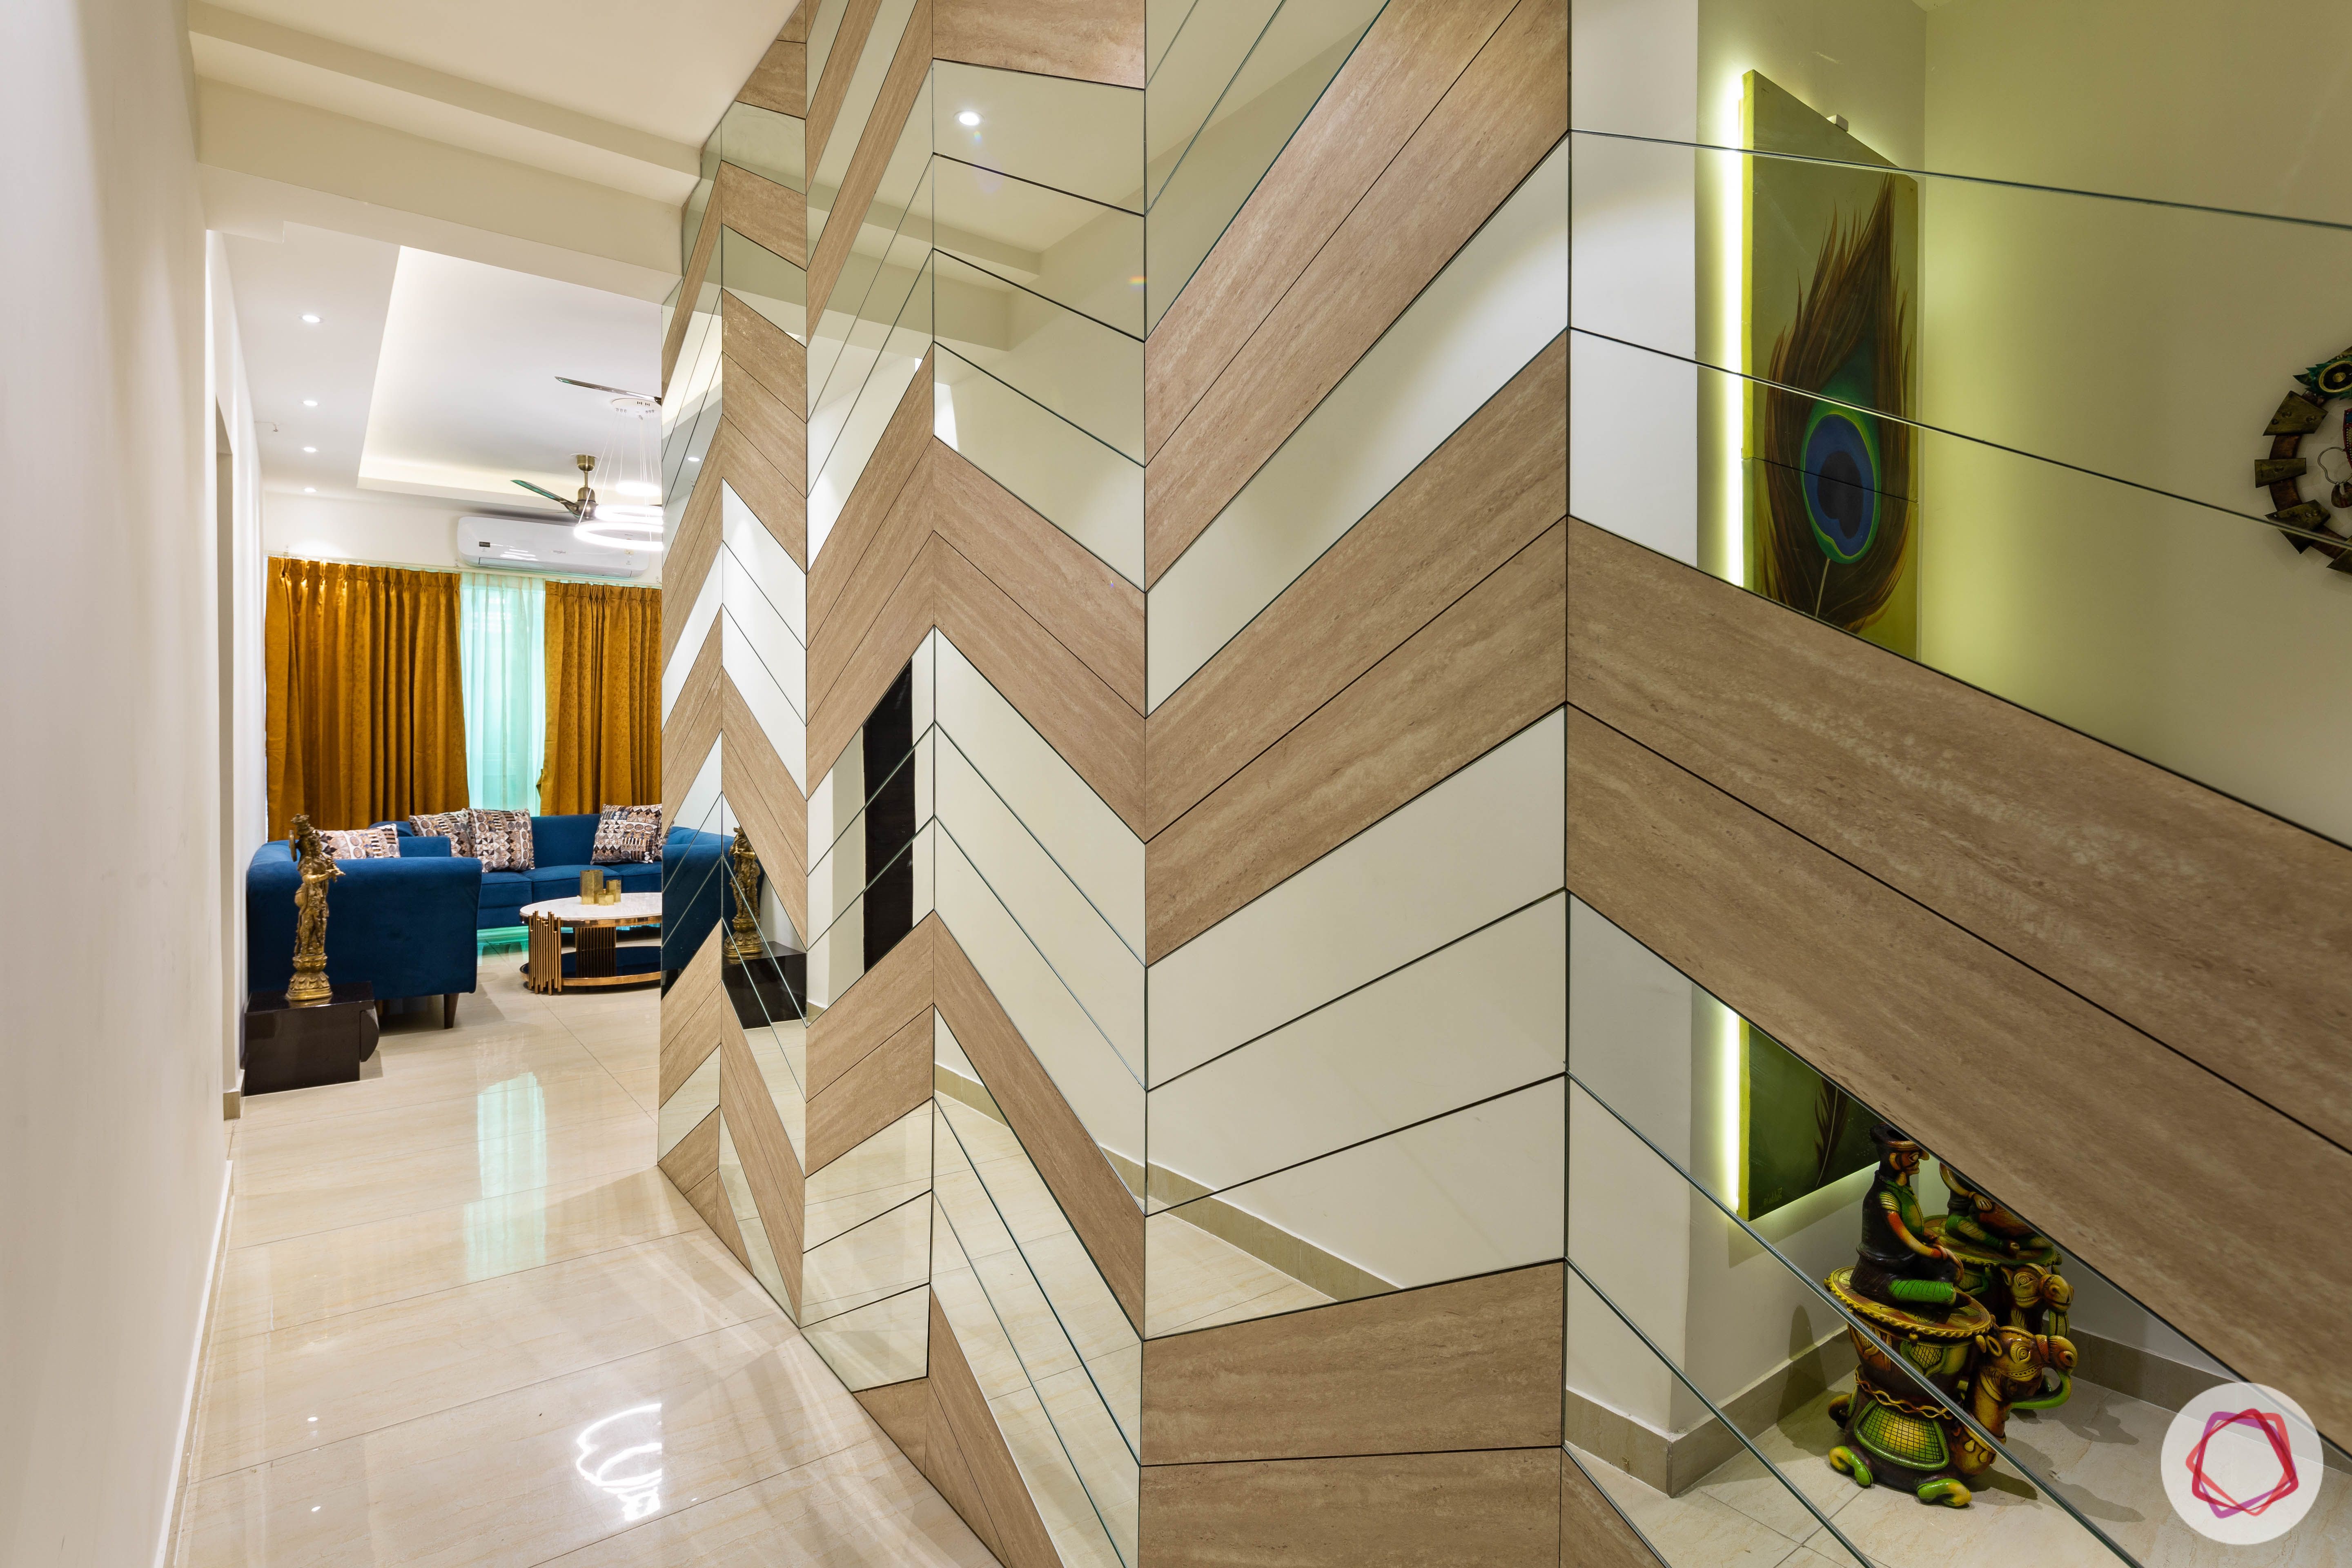 3 bhk flat-home entrance-foyer-wall paneling-wooden and mirror wall panel-chevron pattern